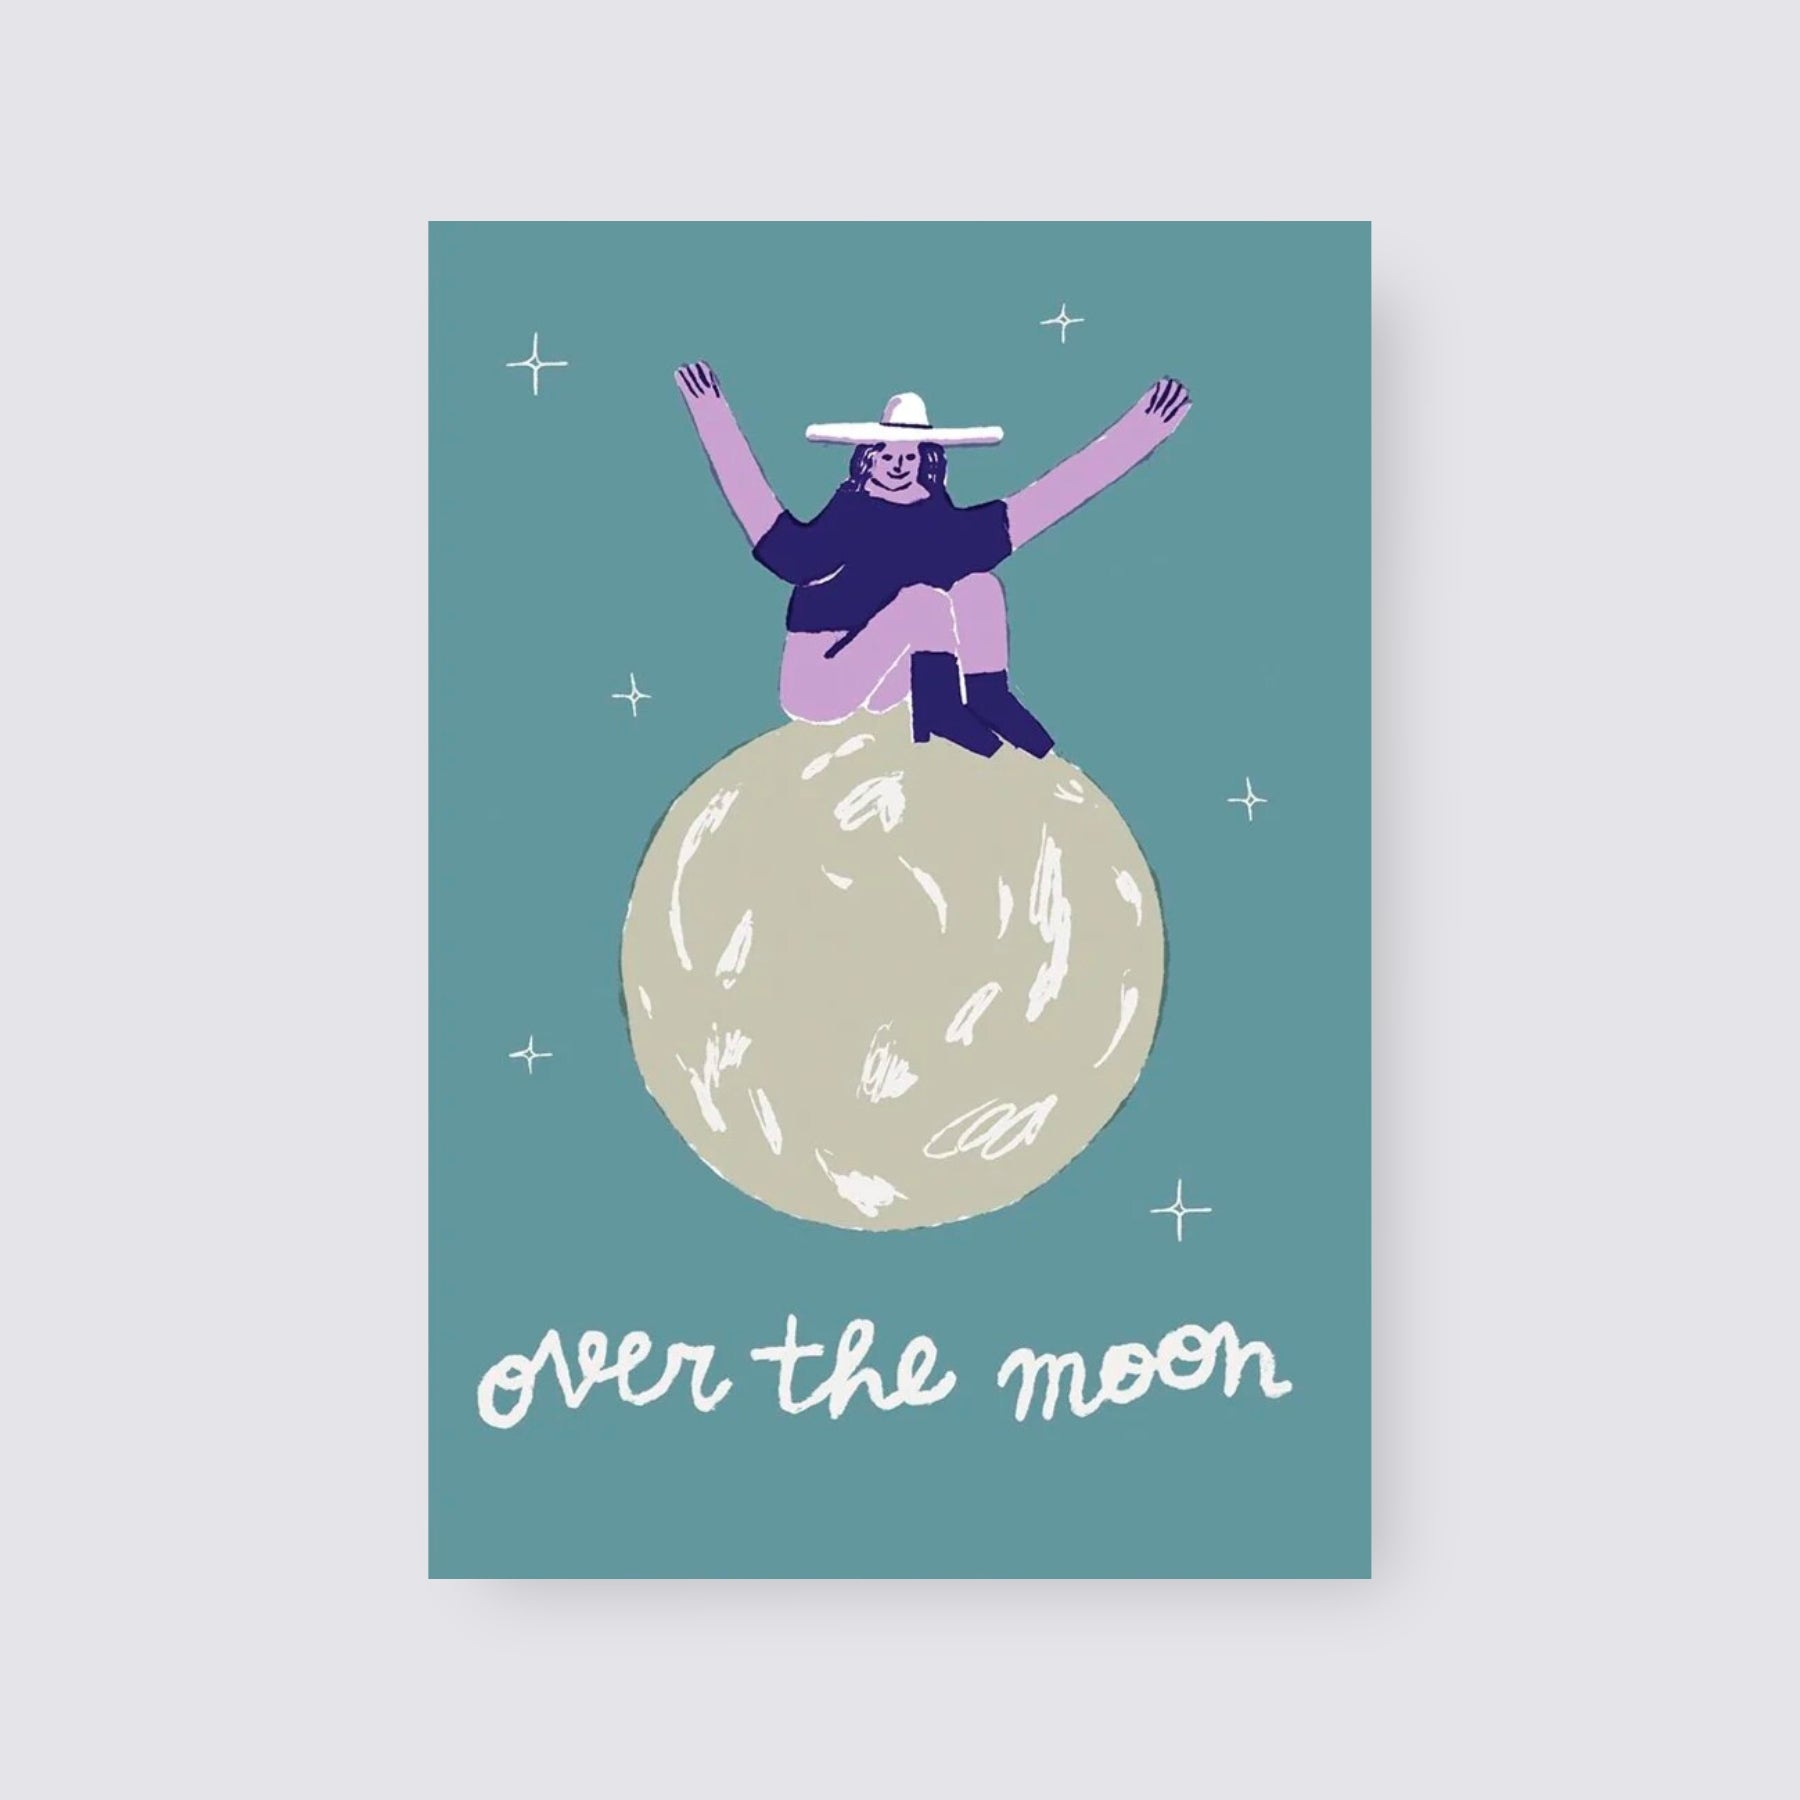 Over the Moon Card